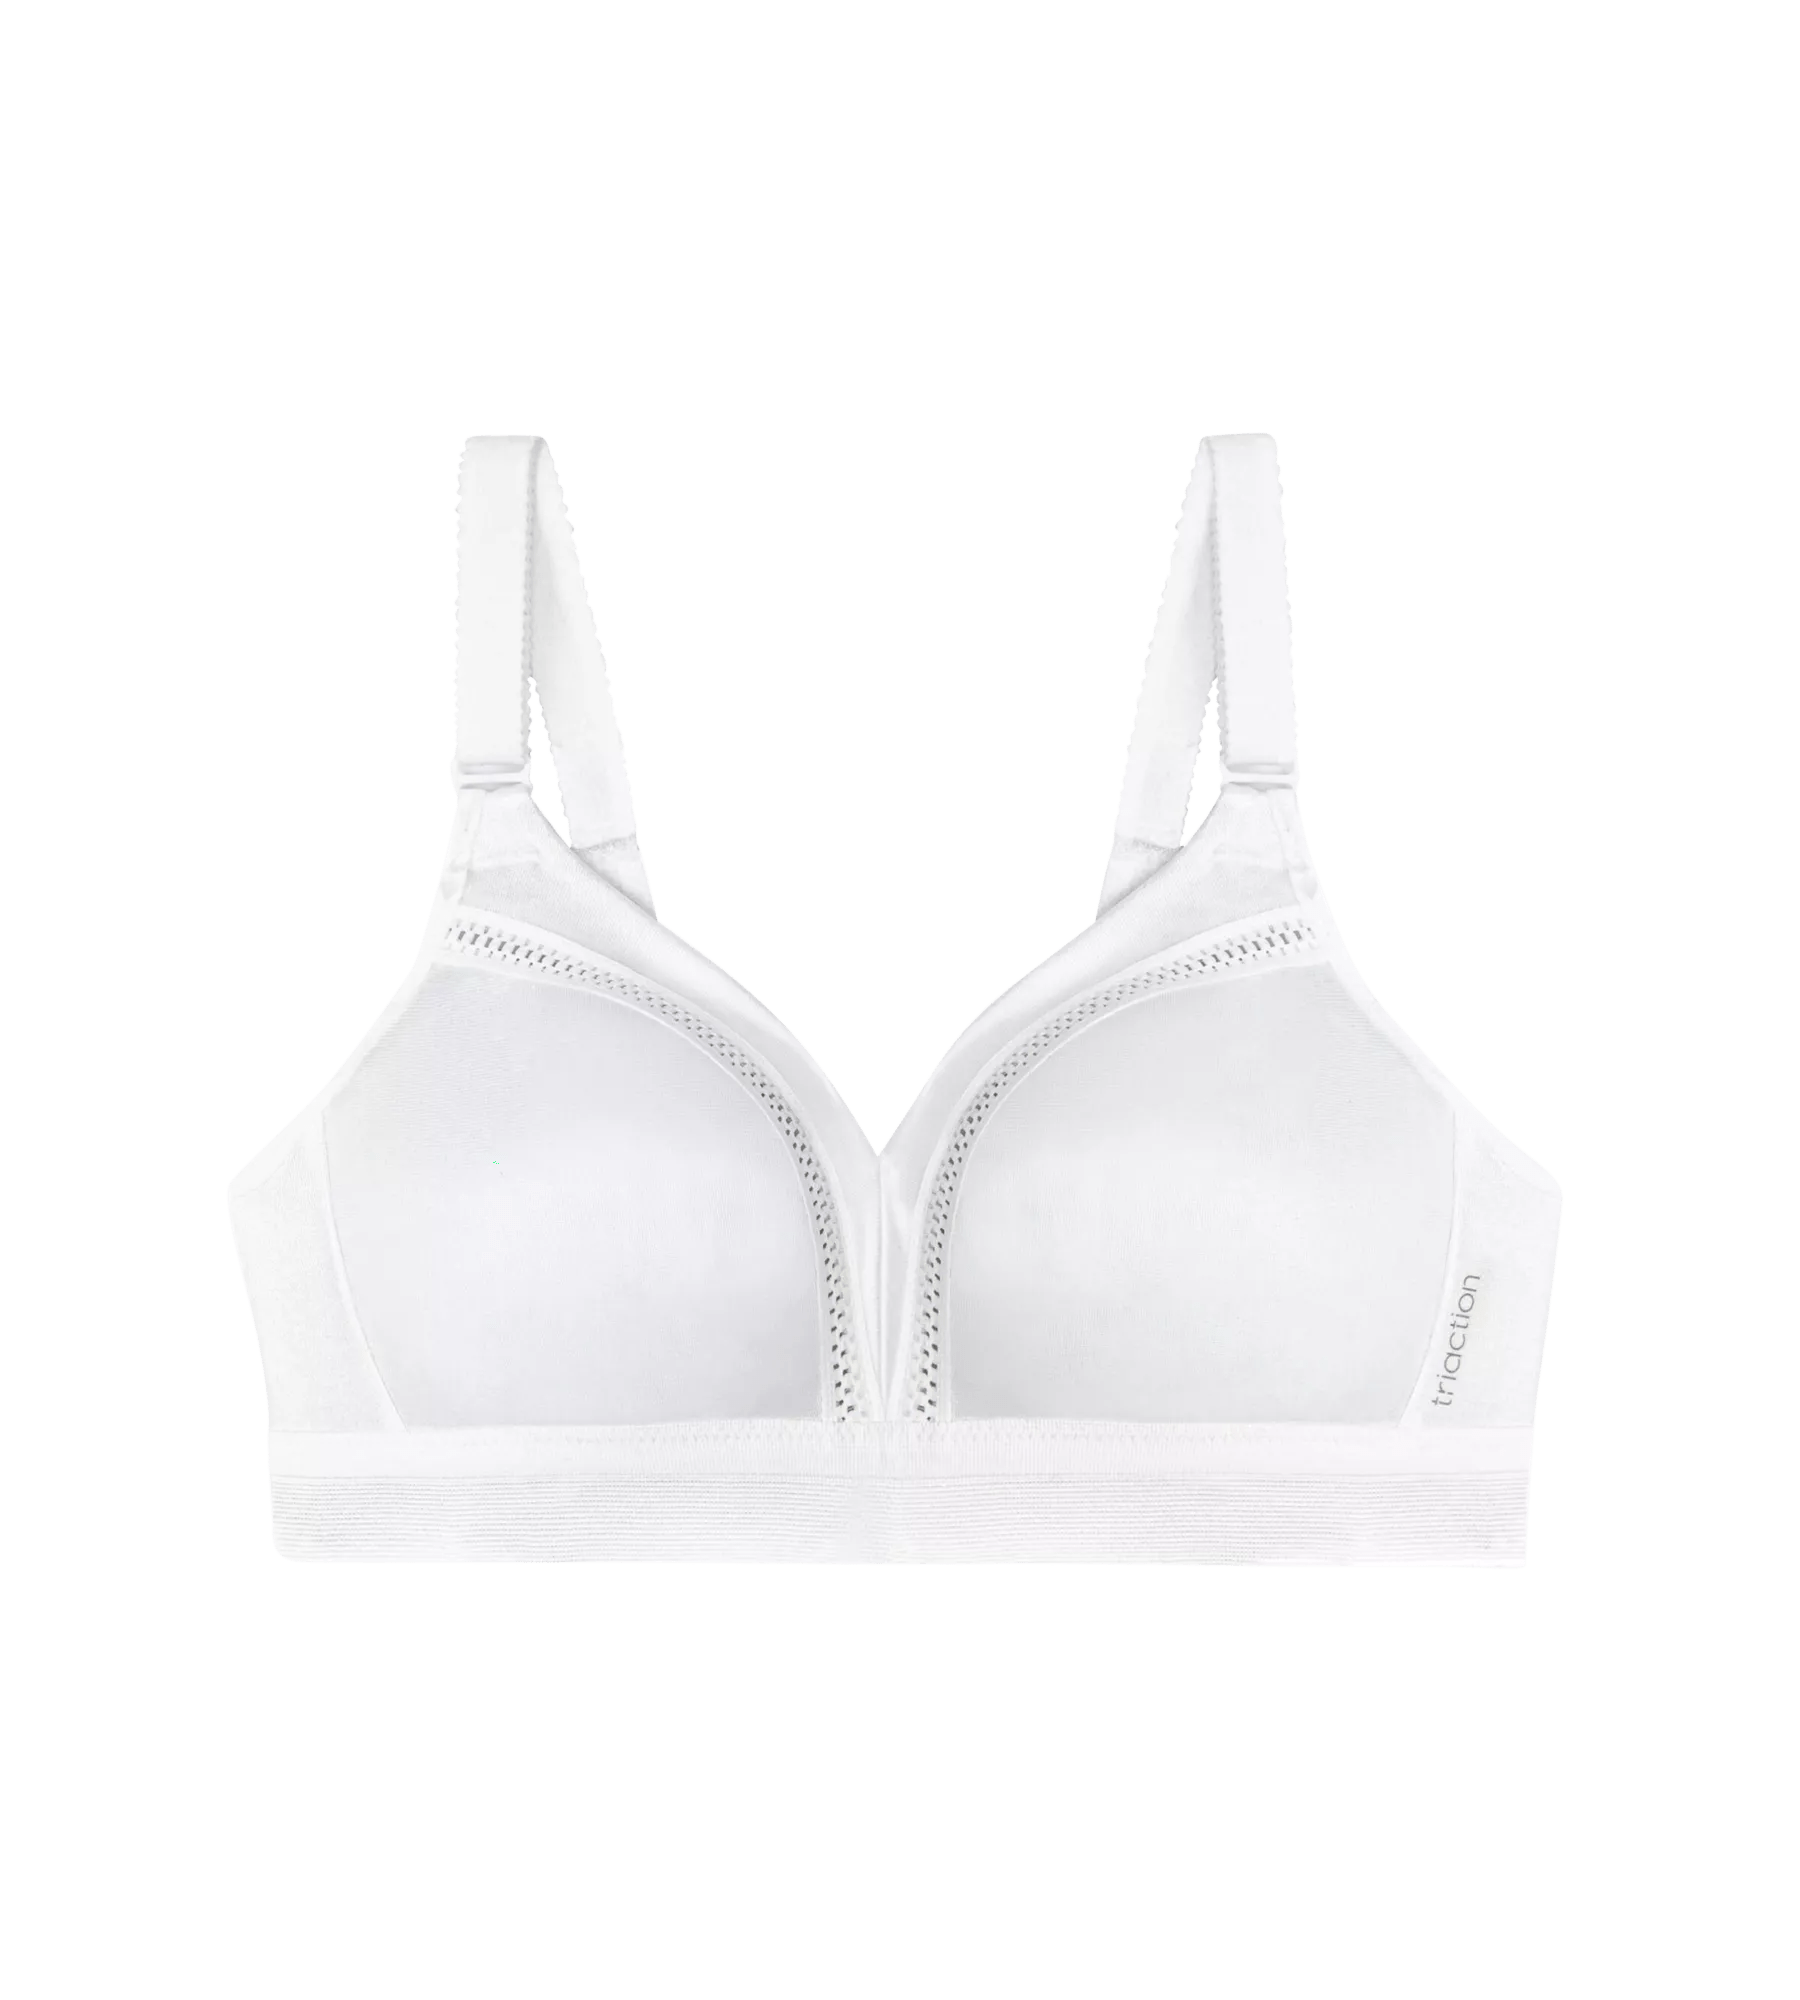  Triumph Triaction Wellness Non-Wired Sports Bra White (0003)  38B CS : Clothing, Shoes & Jewelry